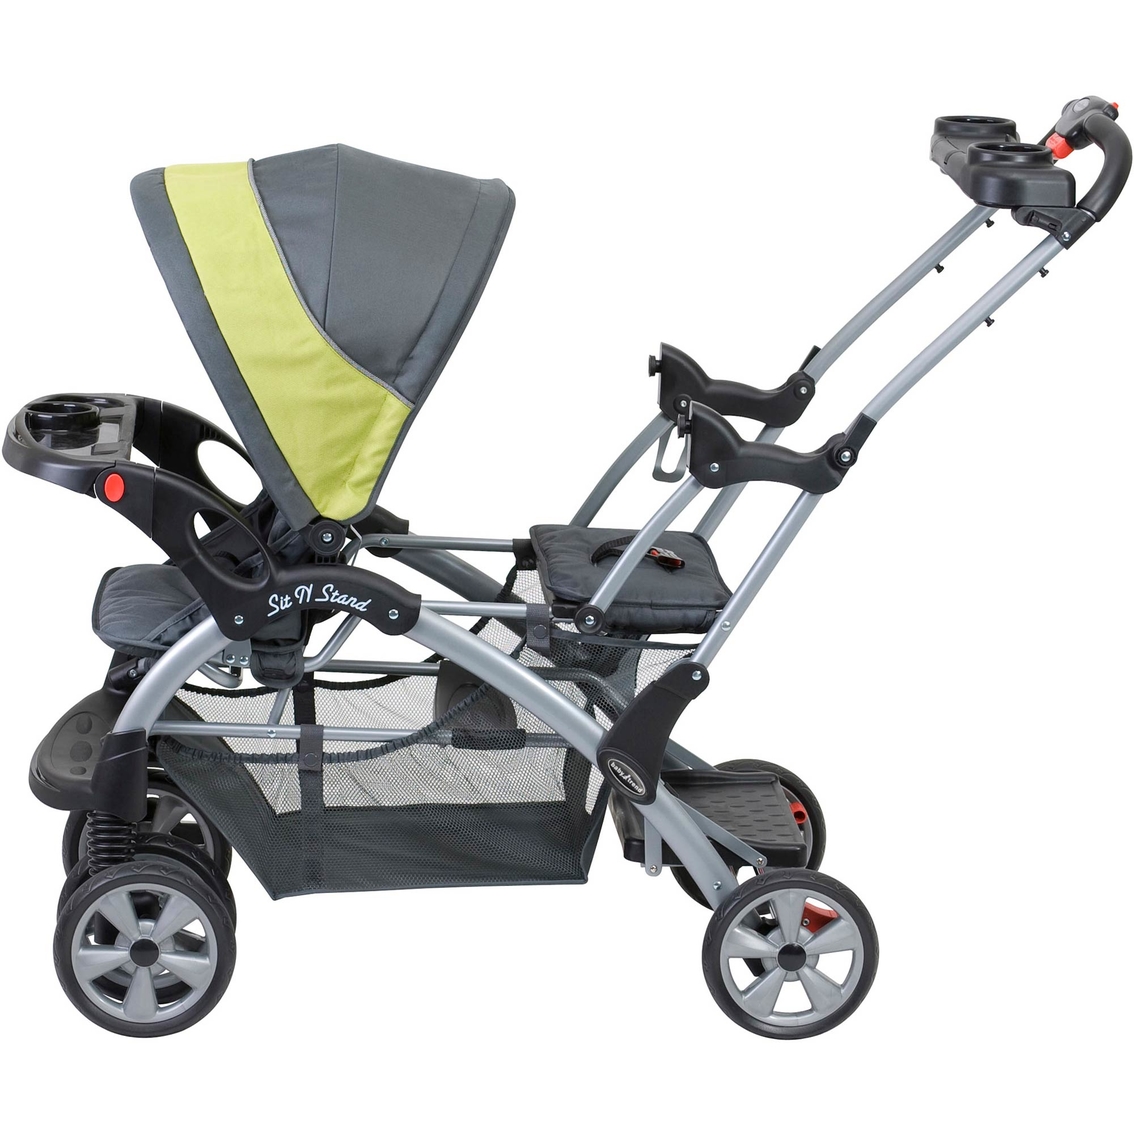 Baby Trend Sit N' Stand Double Stroller Carbon - Image 3 of 3